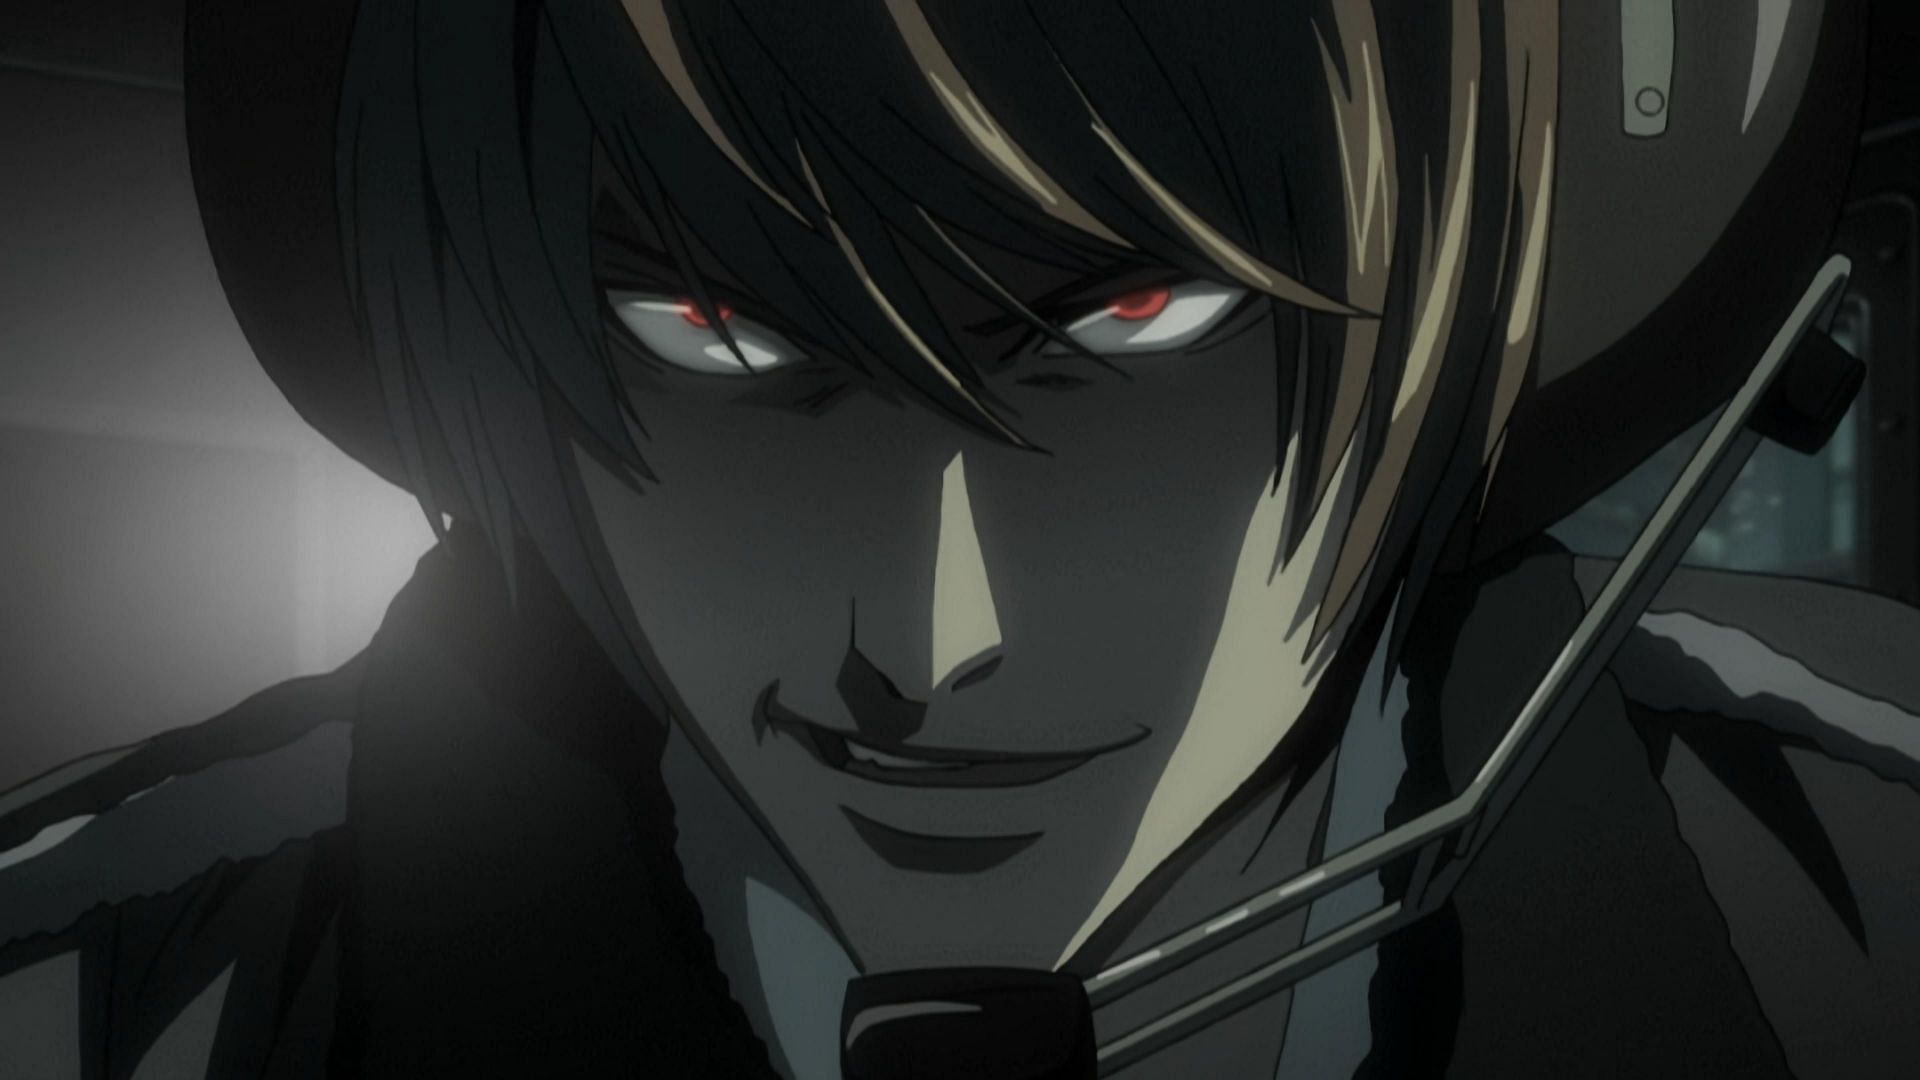 How Old is Light? Light Yagami's Age in Death Note